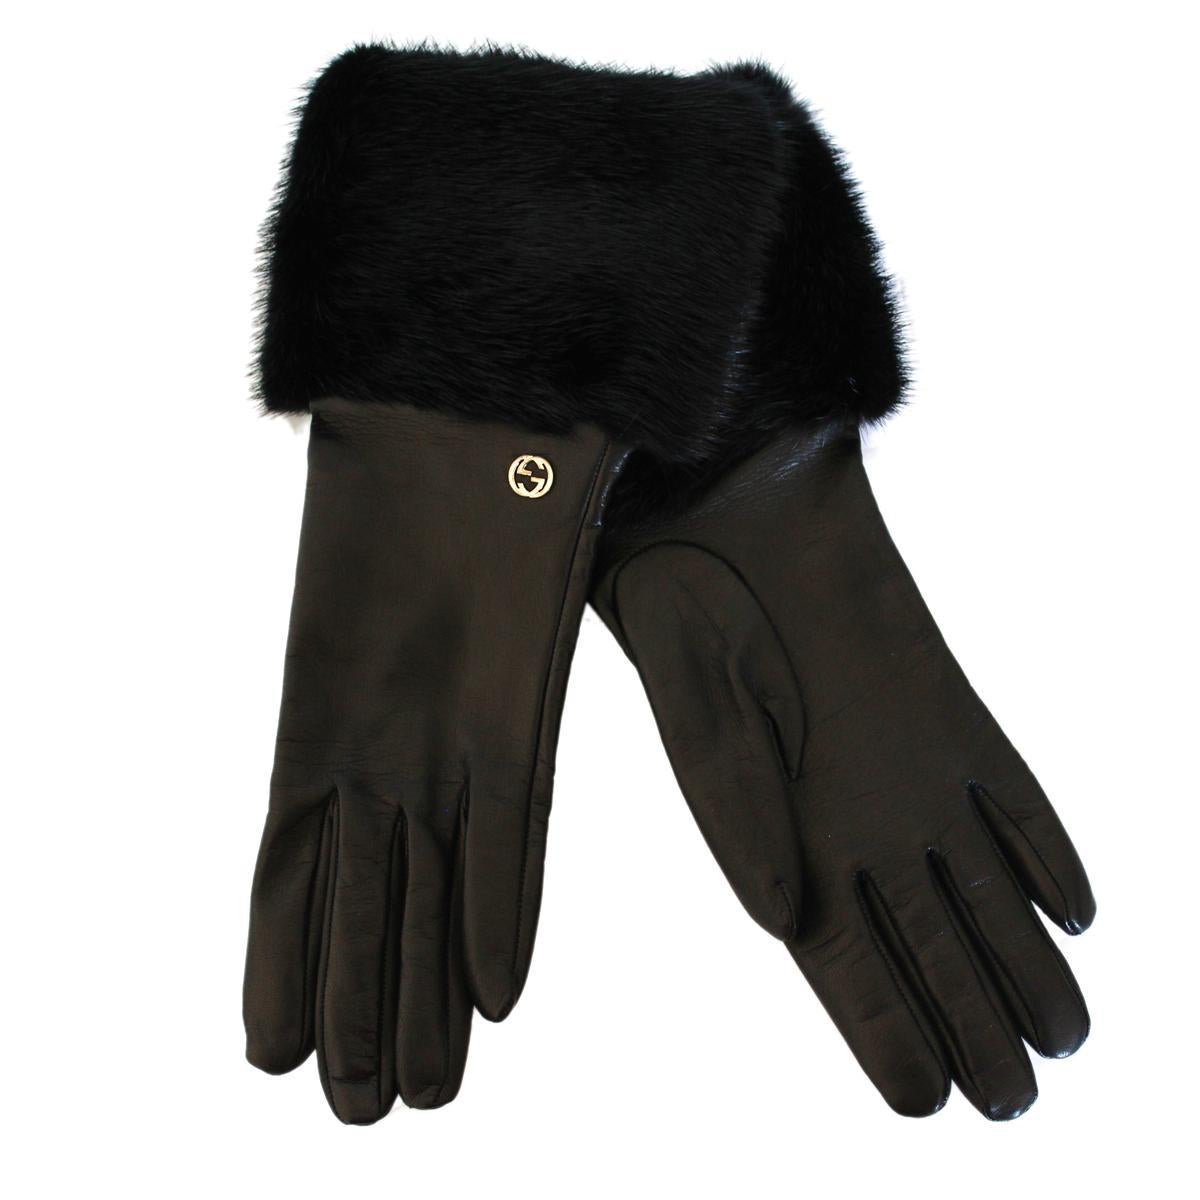 New Gucci Black Leather and Mink Gloves 7, 5